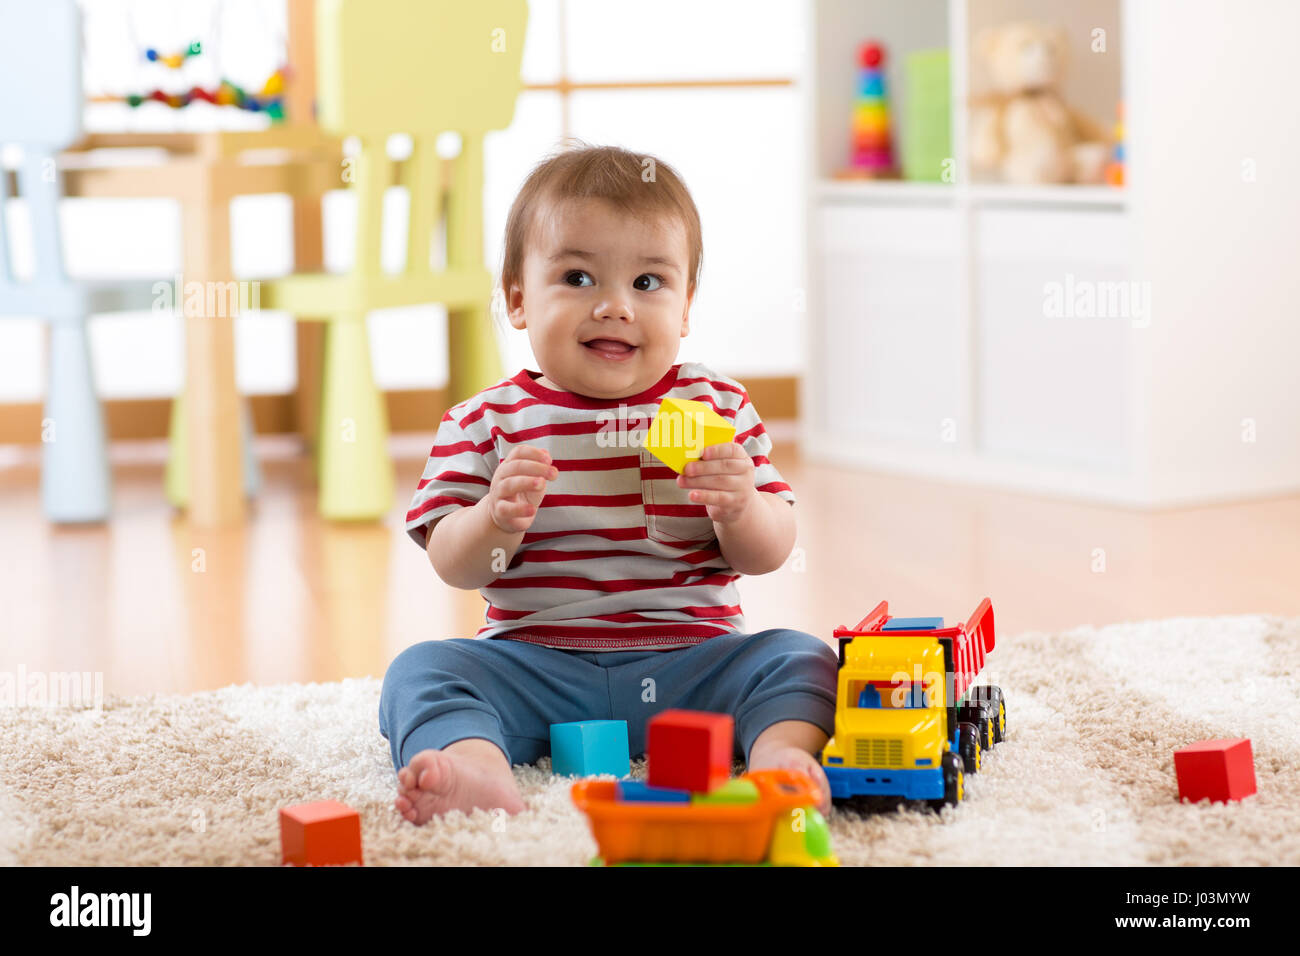 kid boy toddler playing with toy car indoors Stock Photo